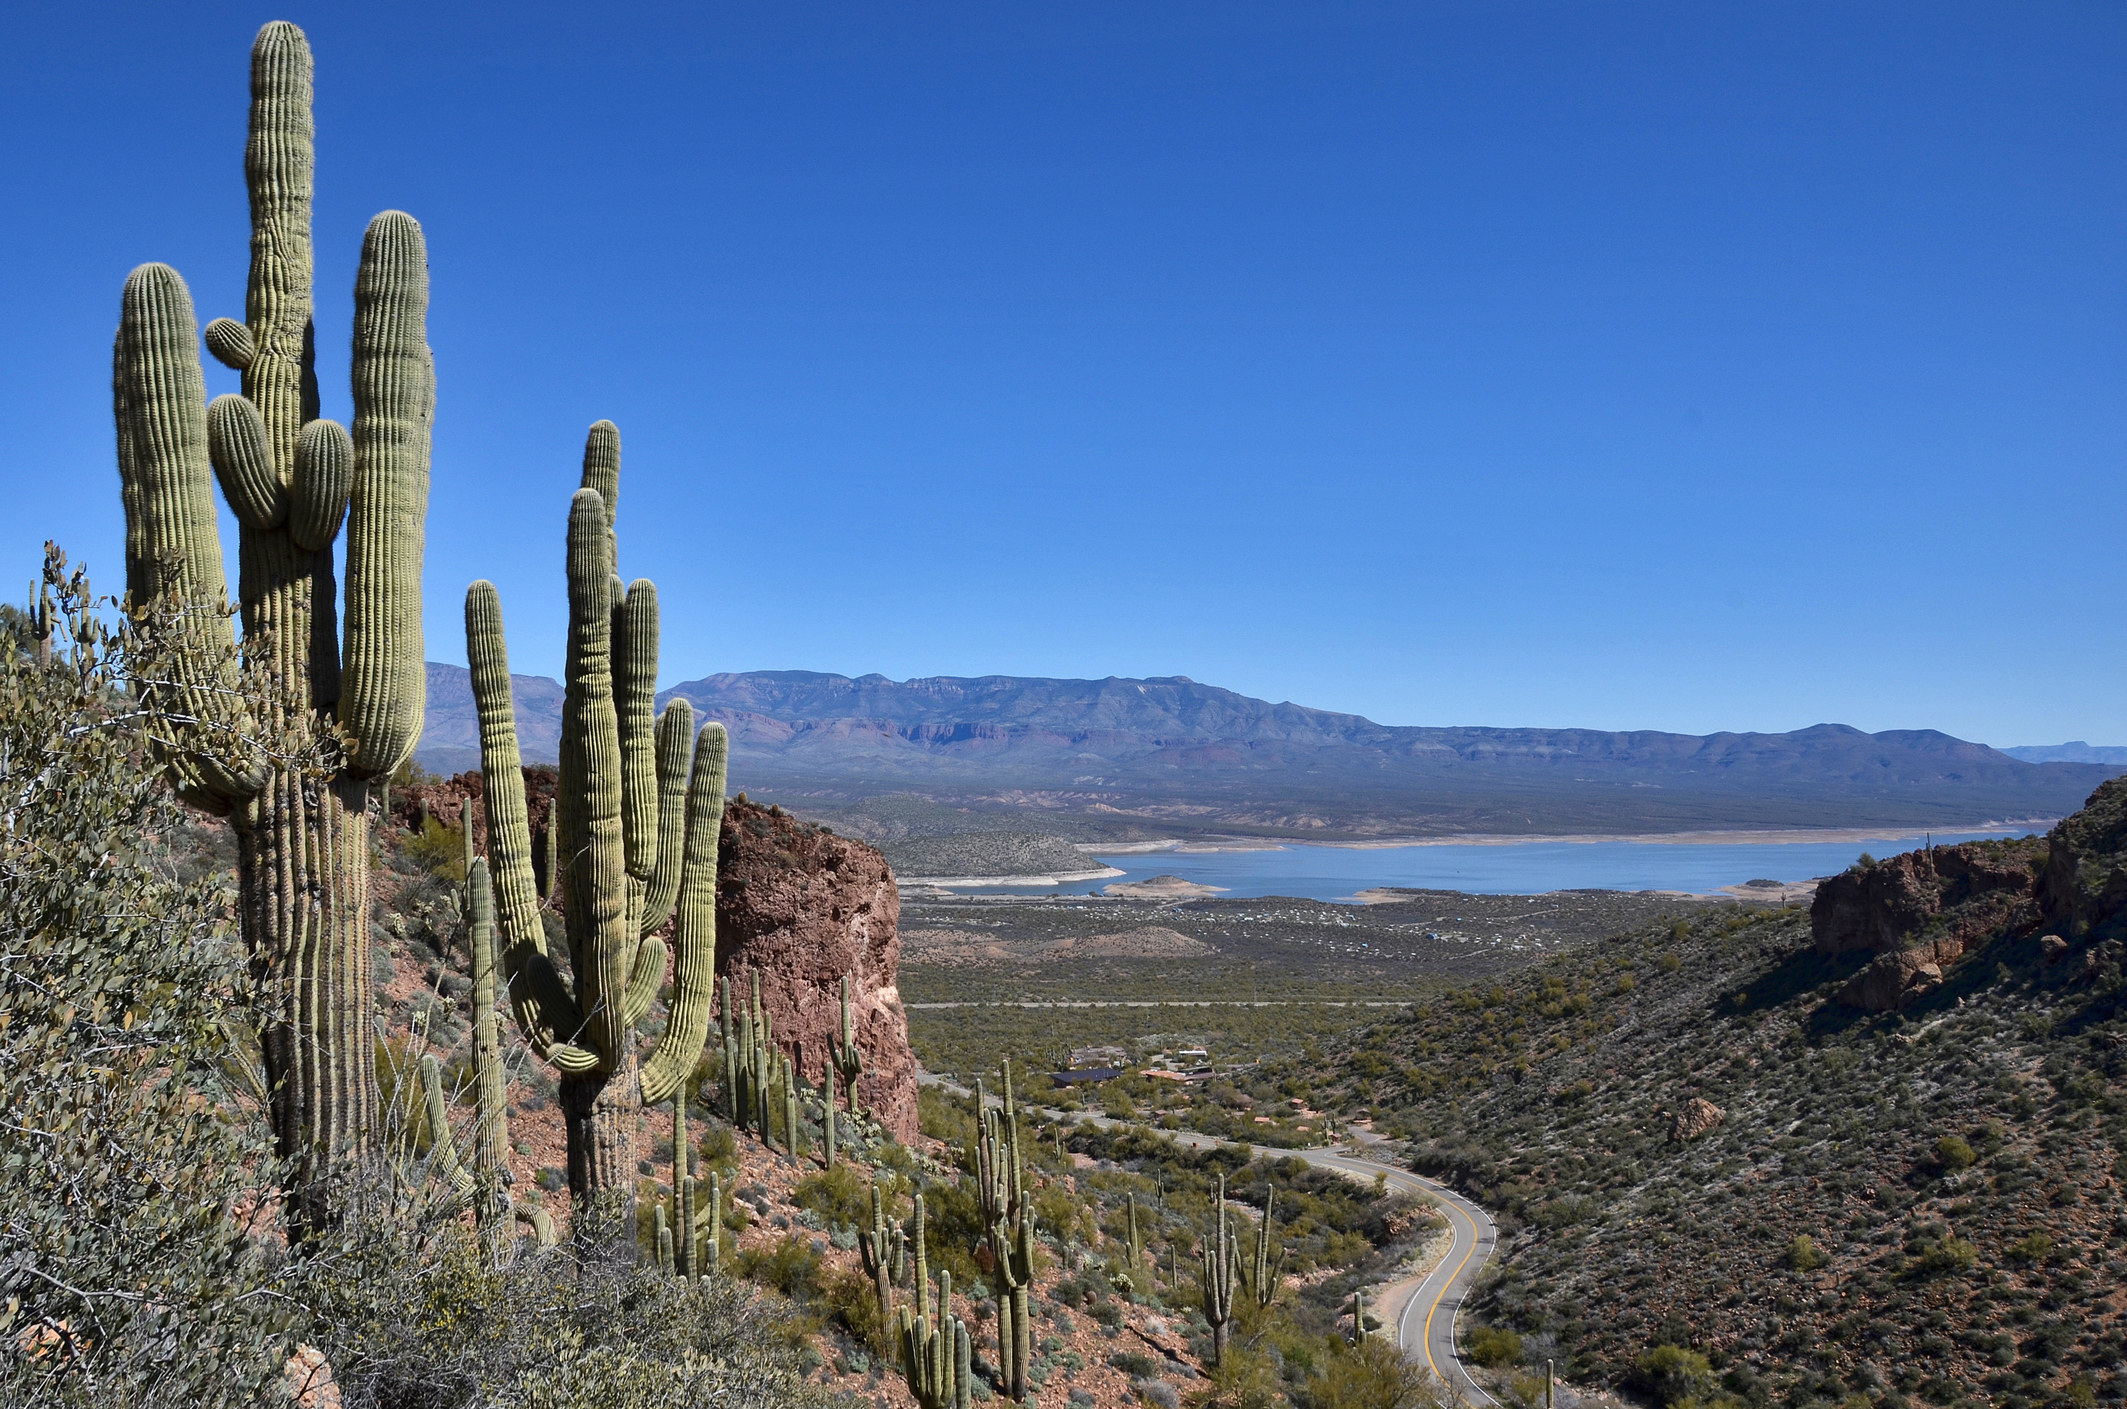 A landscape with cacti